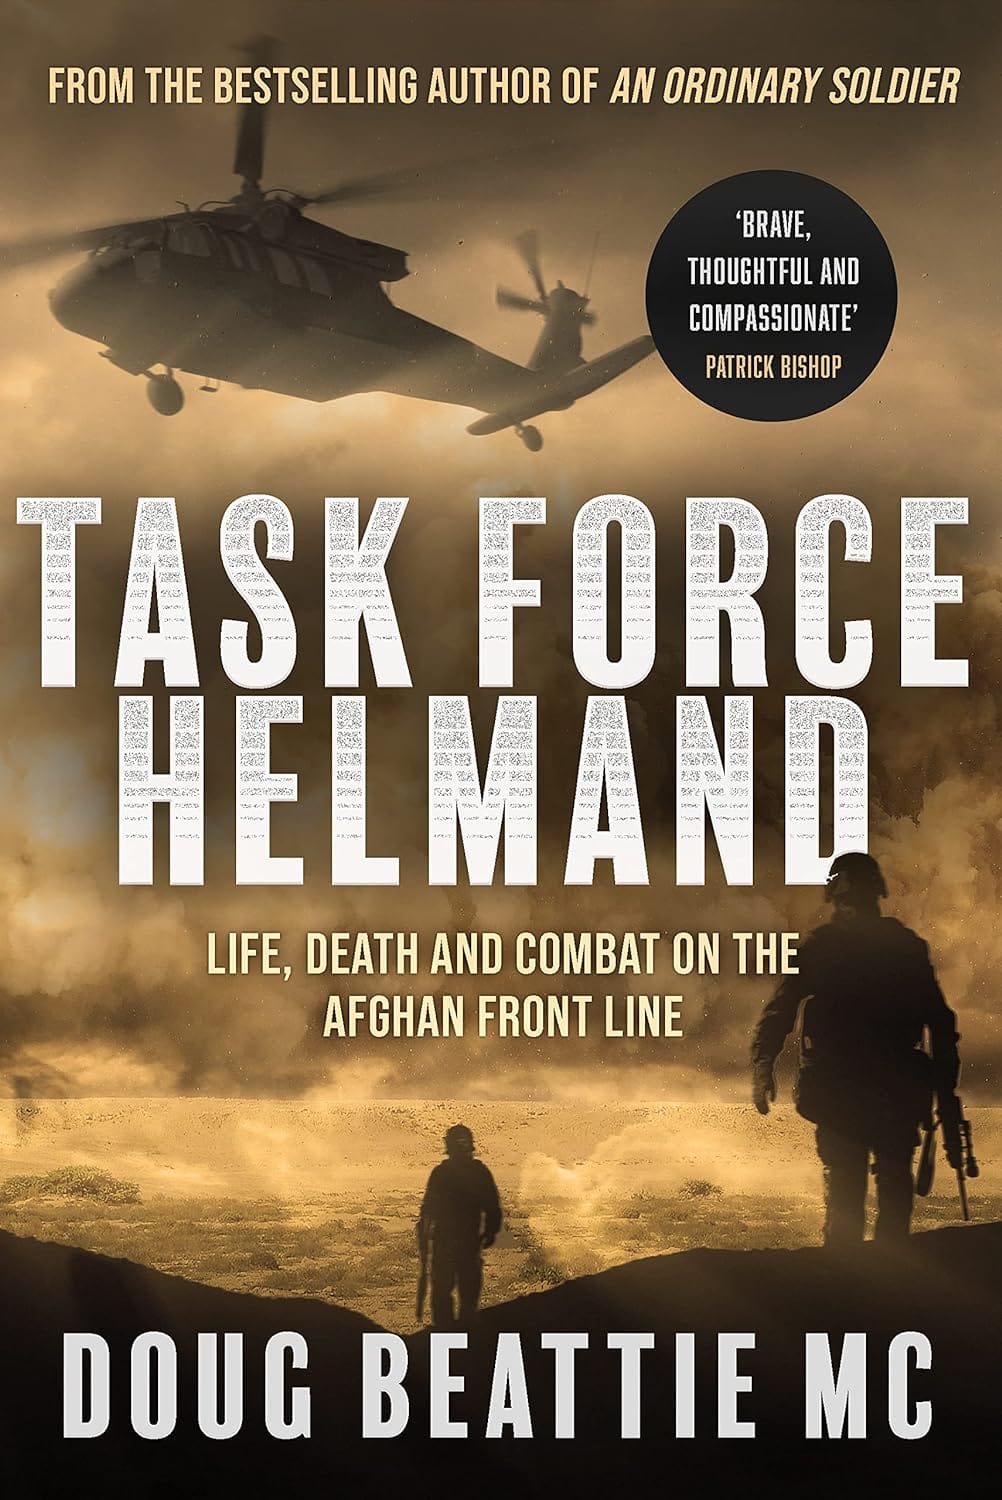 Book cover of "task force helmand" by doug beattie mc featuring text overlay and a silhouette of a soldier against a sunset backdrop.